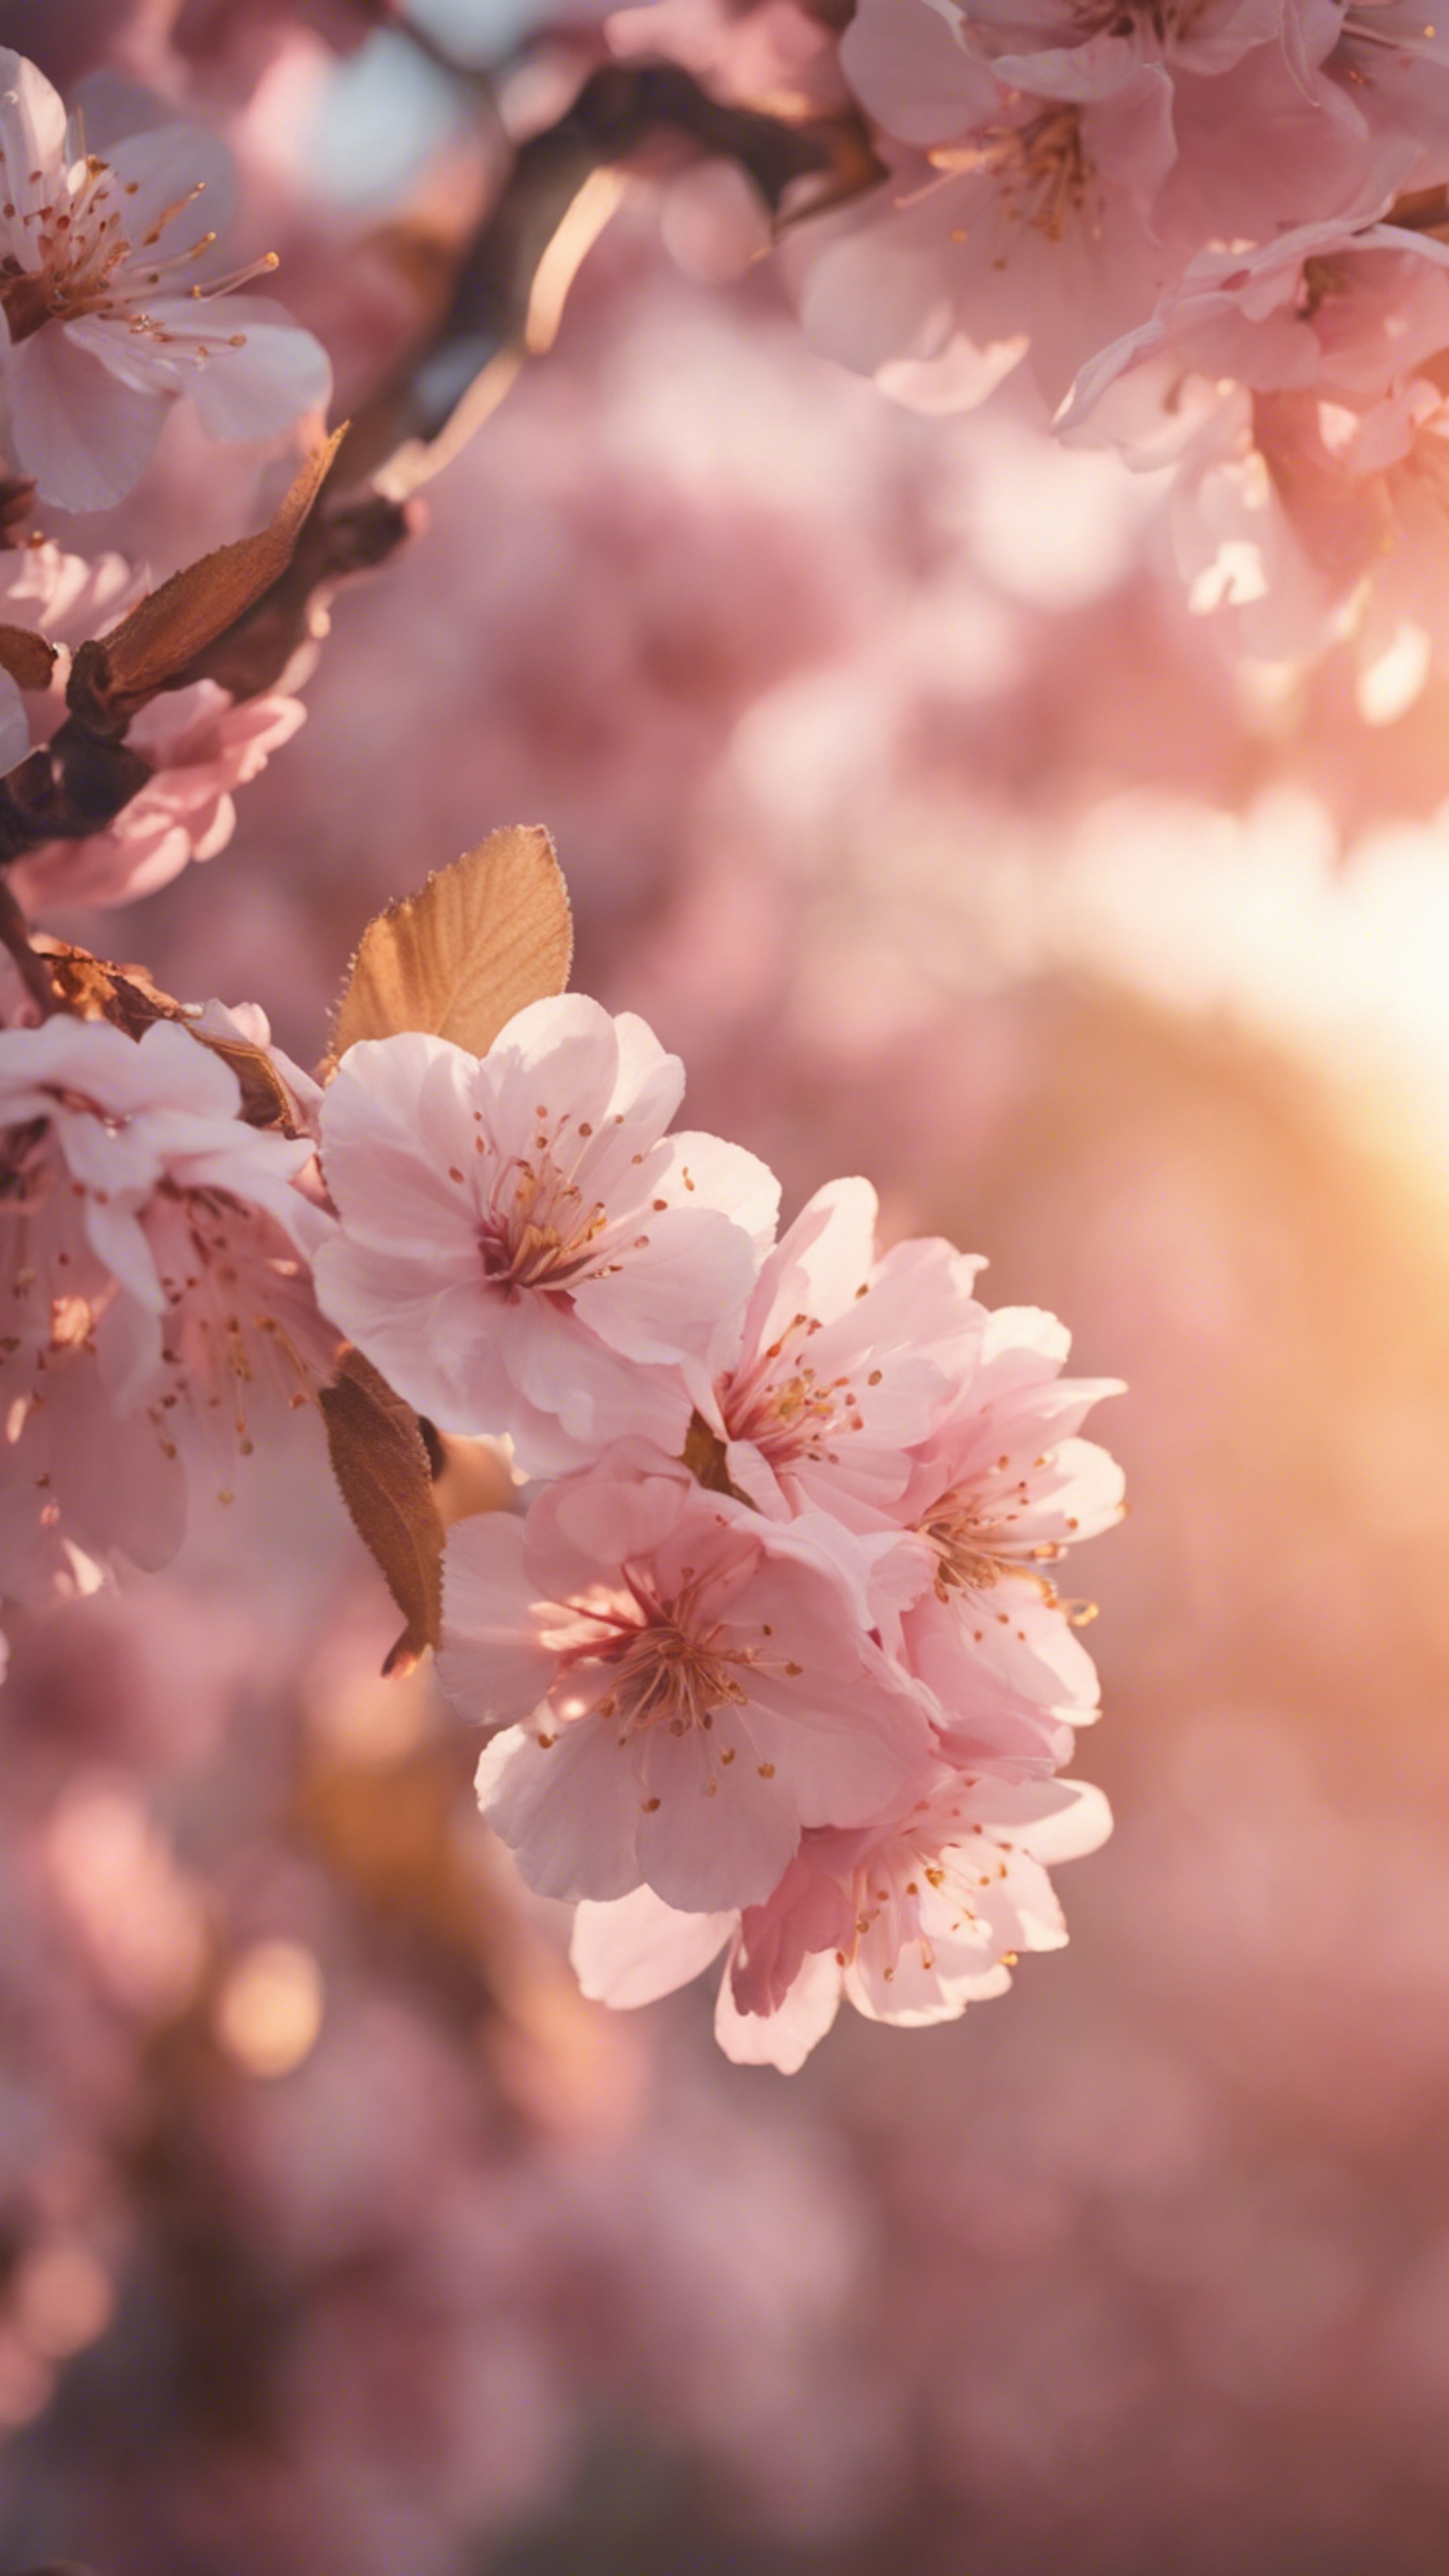 A delicate pink cherry blossom tree with gold leaves against a soft sunset. Hình nền[63878b5c392143fbba4e]